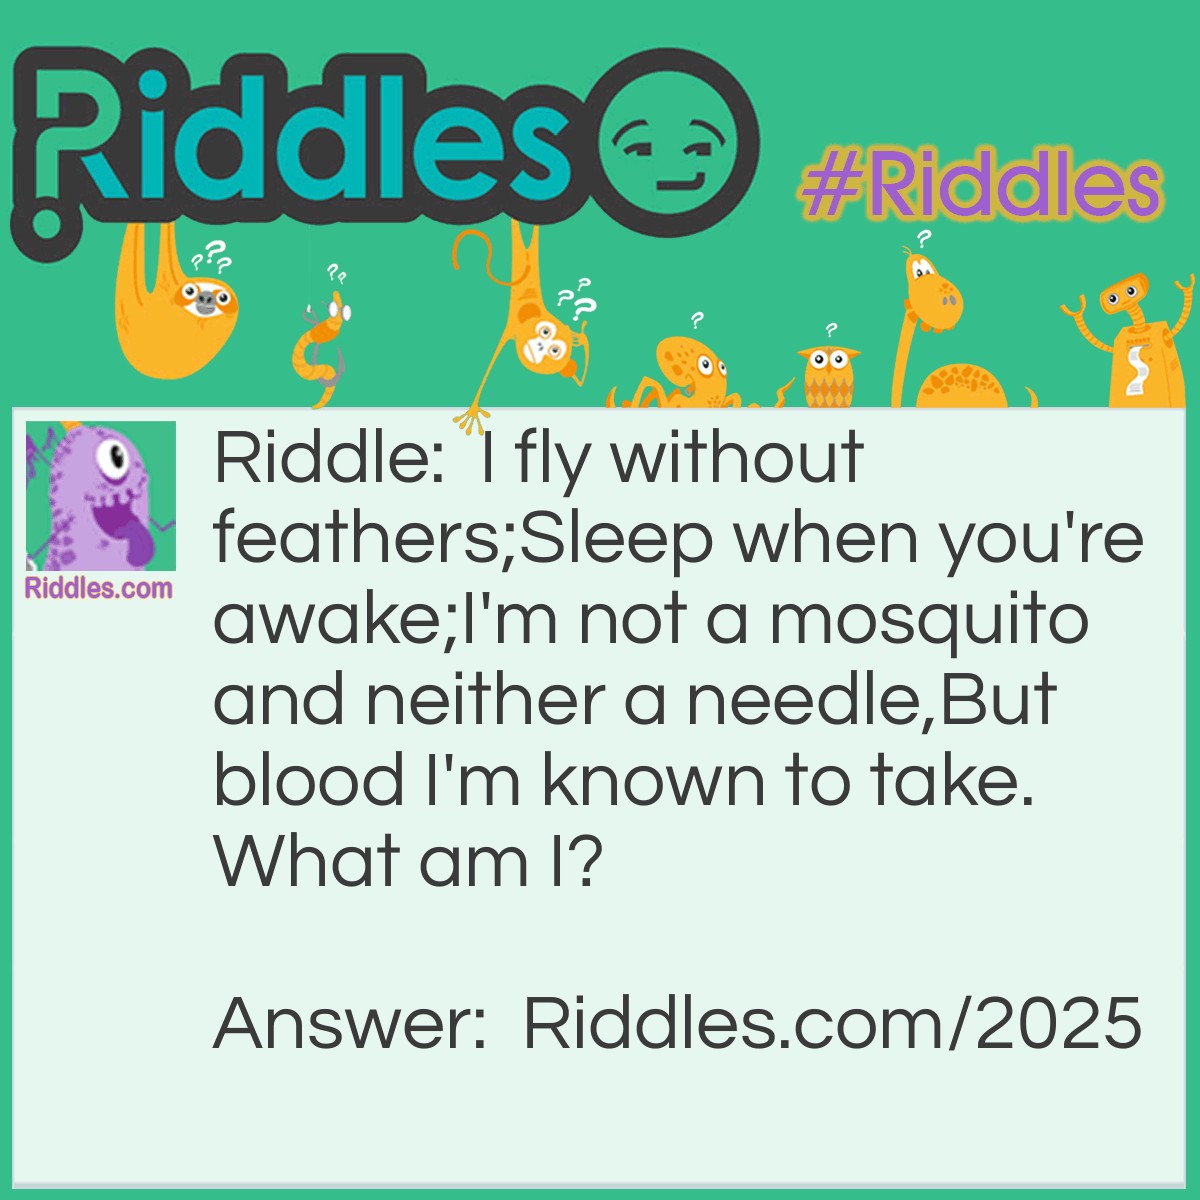 Riddle: I fly without feathers;
Sleep when you're awake;
I'm not a mosquito and neither a needle,
But blood I'm known to take.
What am I? Answer: Bat